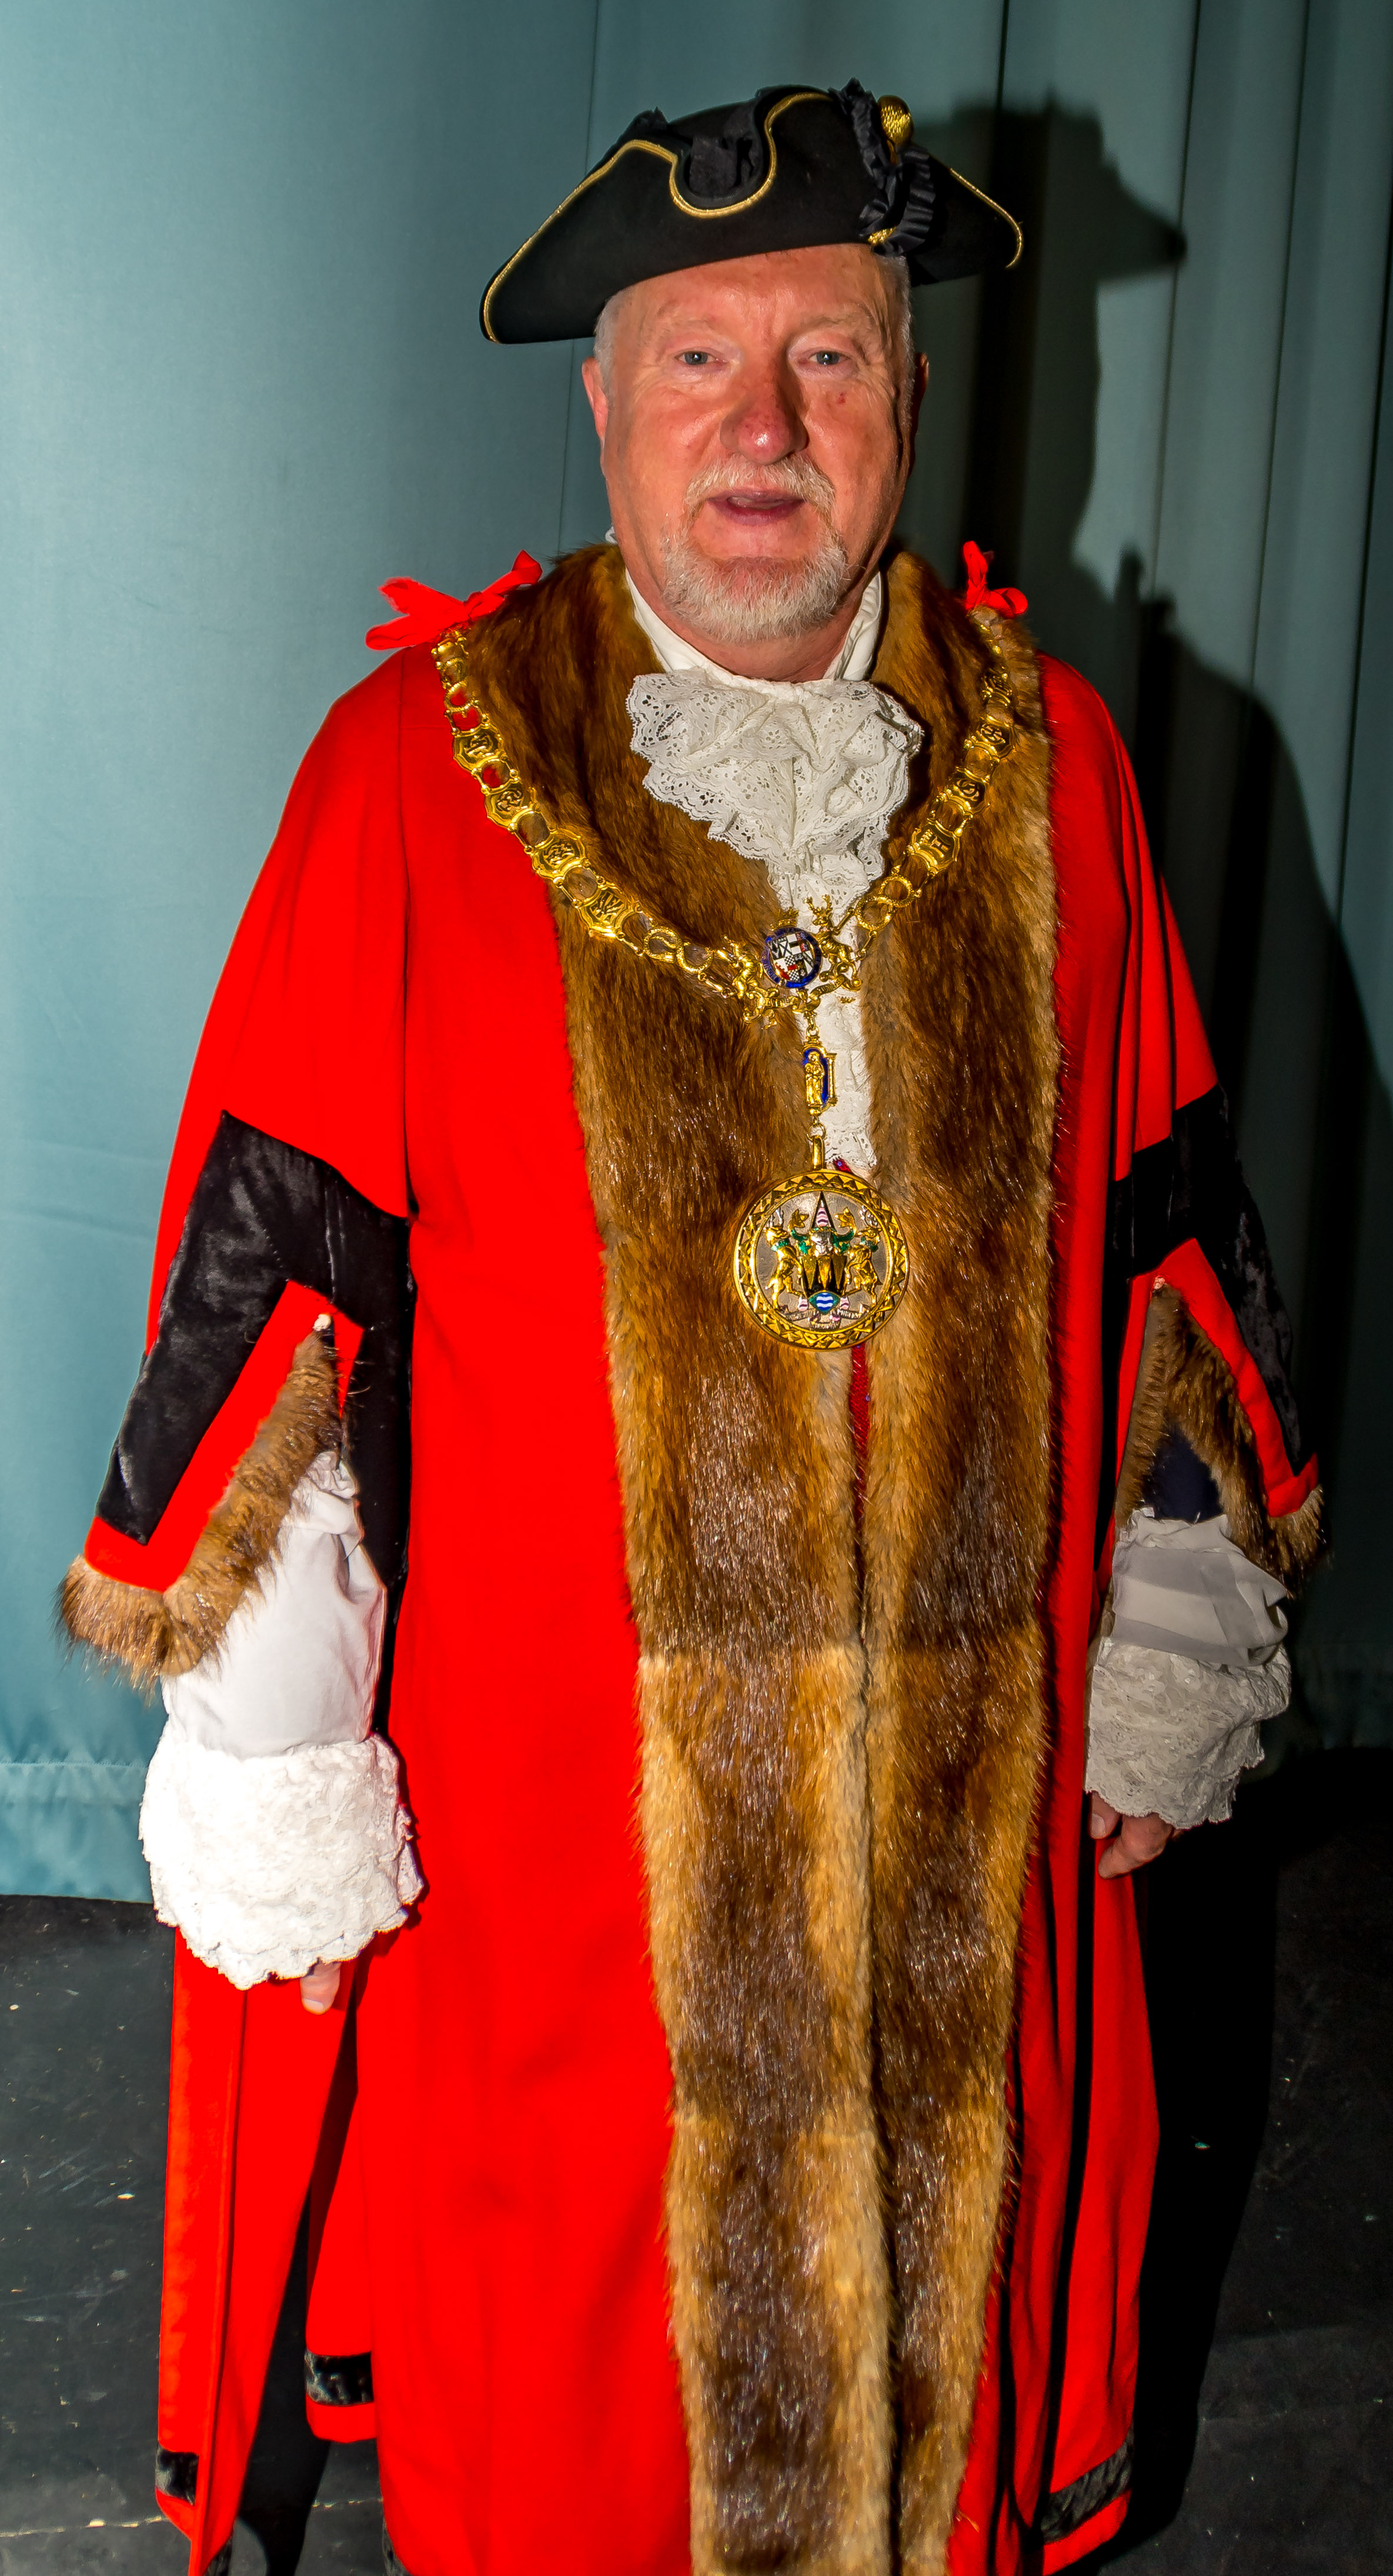 A picture of the new Mayor Cllr Ed Kelly